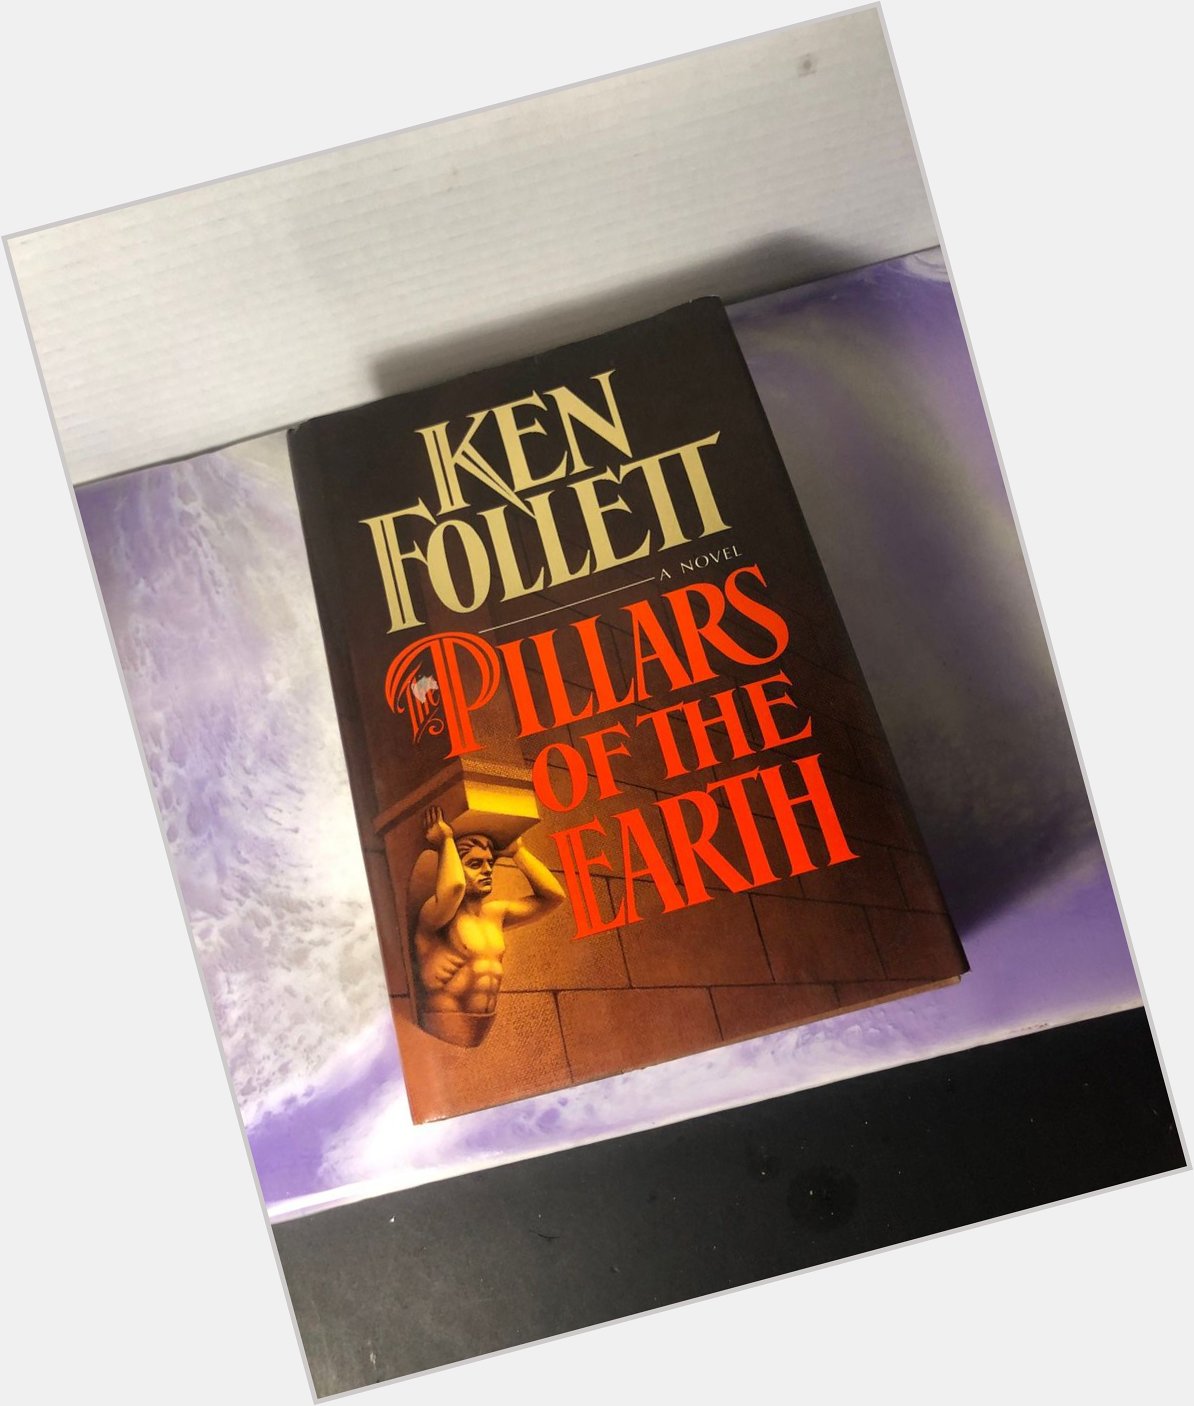  Happy Birthday  to
Ken Follett! 
\The Pillars of the Earth\ is one of the best books I ever read. 